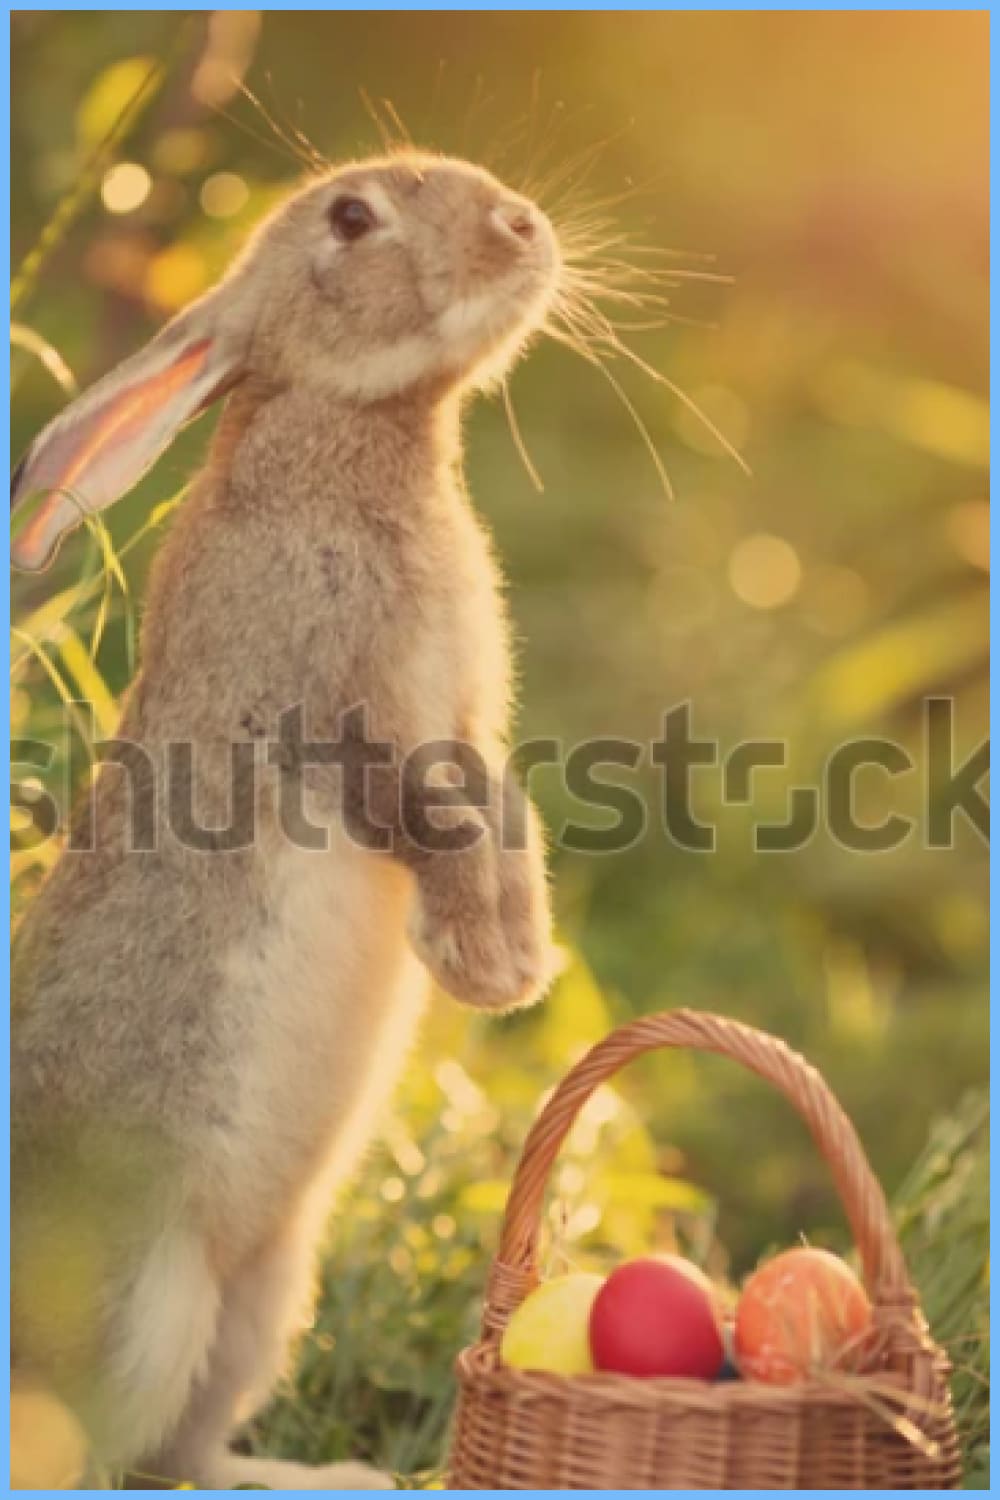 Happy Easter Bunny on a card on their hind legs with flowers at sunset.